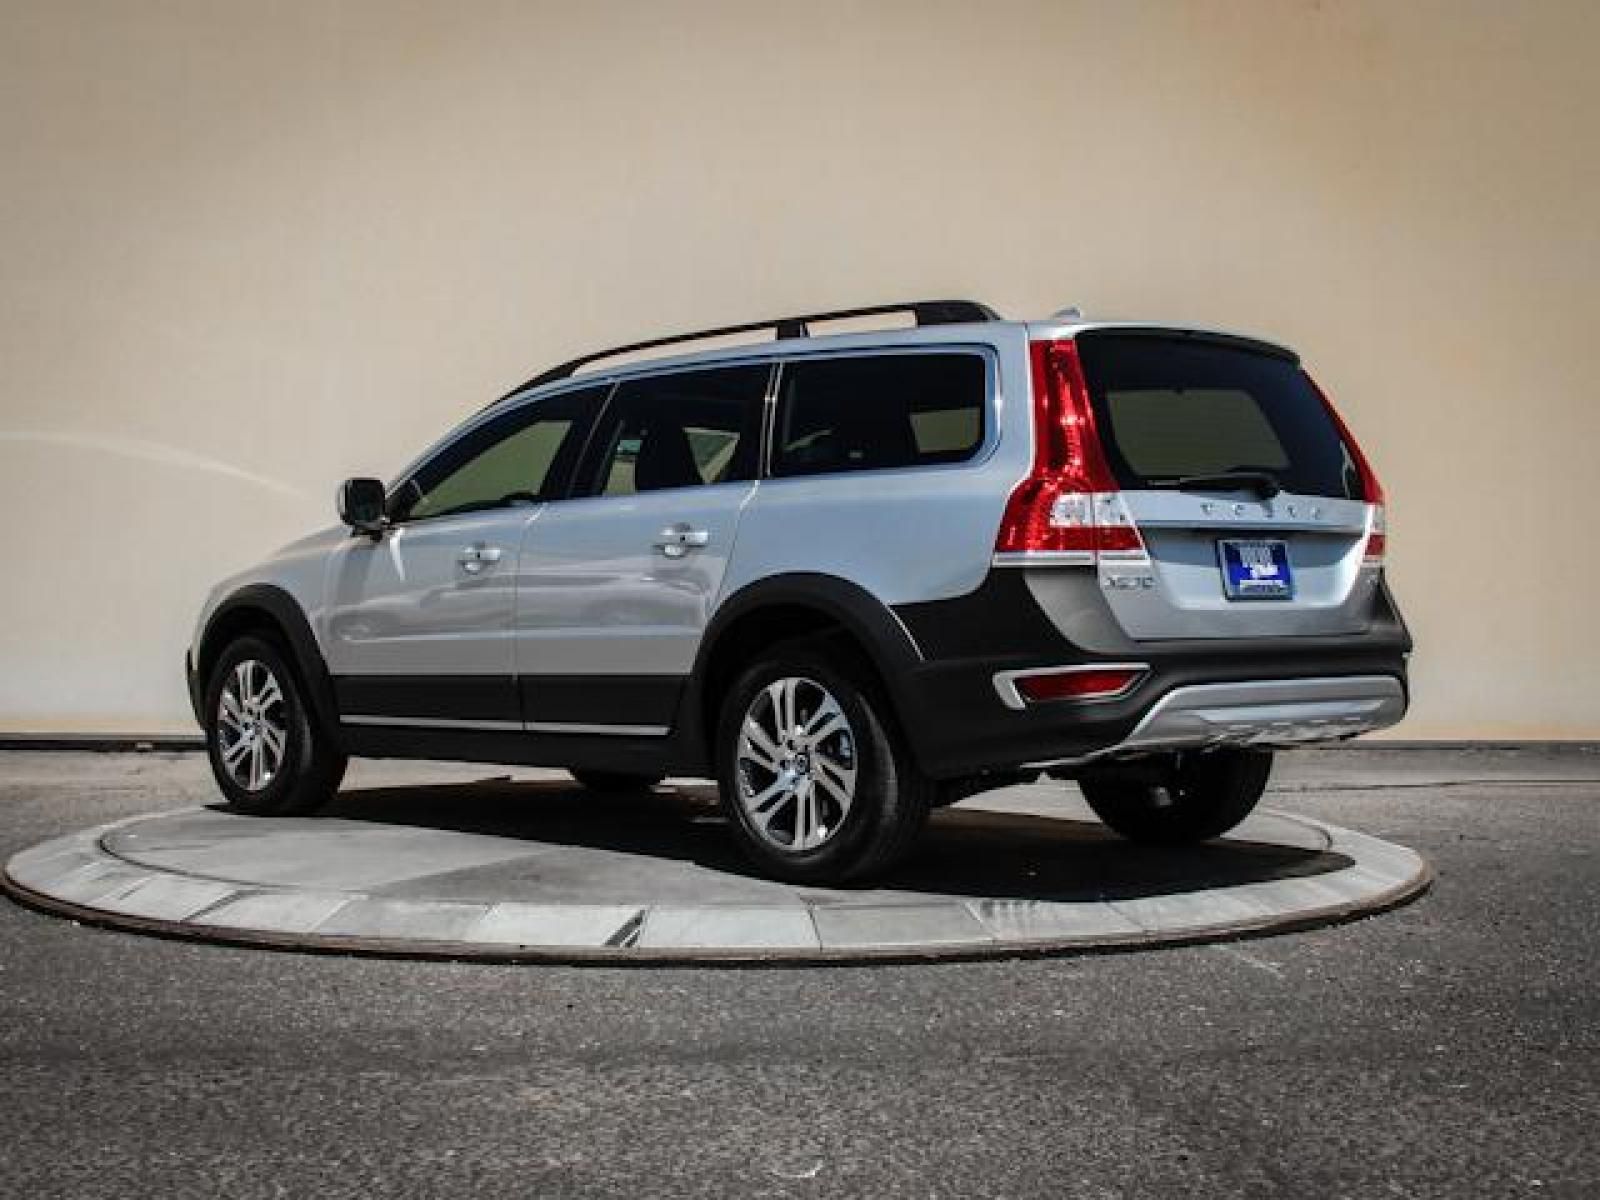 2015 Volvo XC70 T6 AWD 0-60 Times, Top Speed, Specs, Quarter Mile, and ...